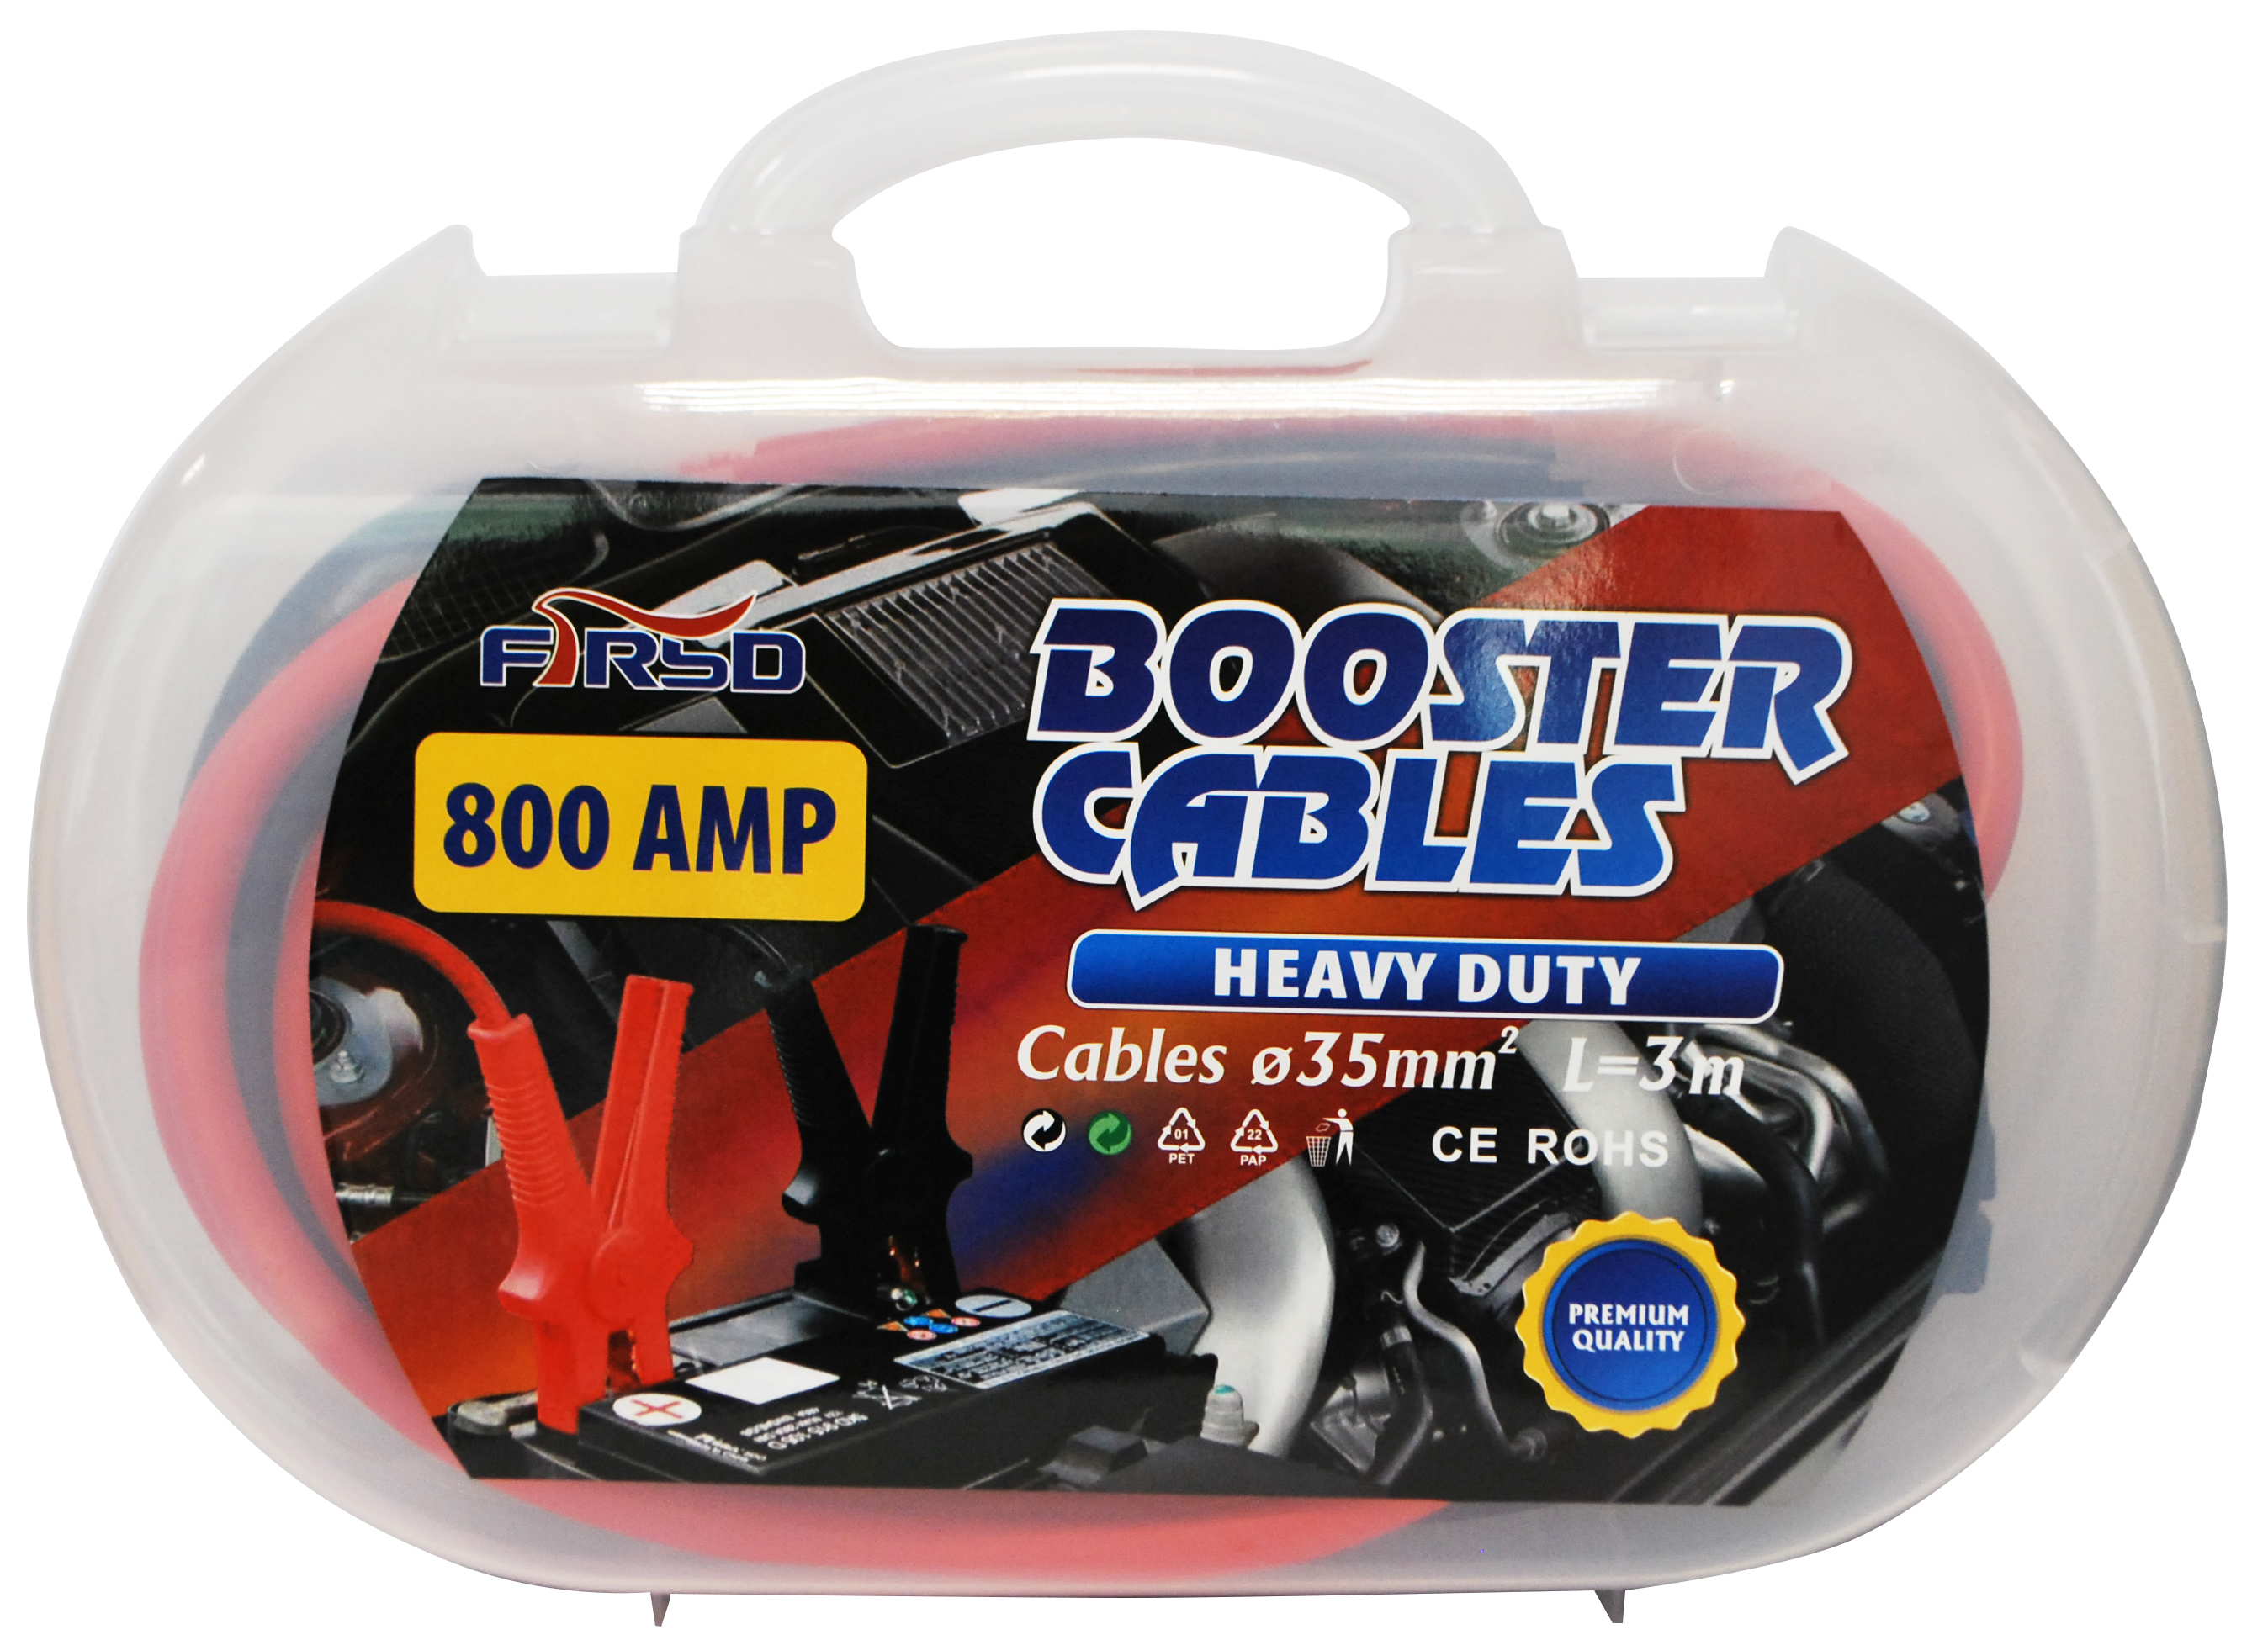 FIRSD  BOOSTER CABLE HD 800AMP TRANSPARENT CASE